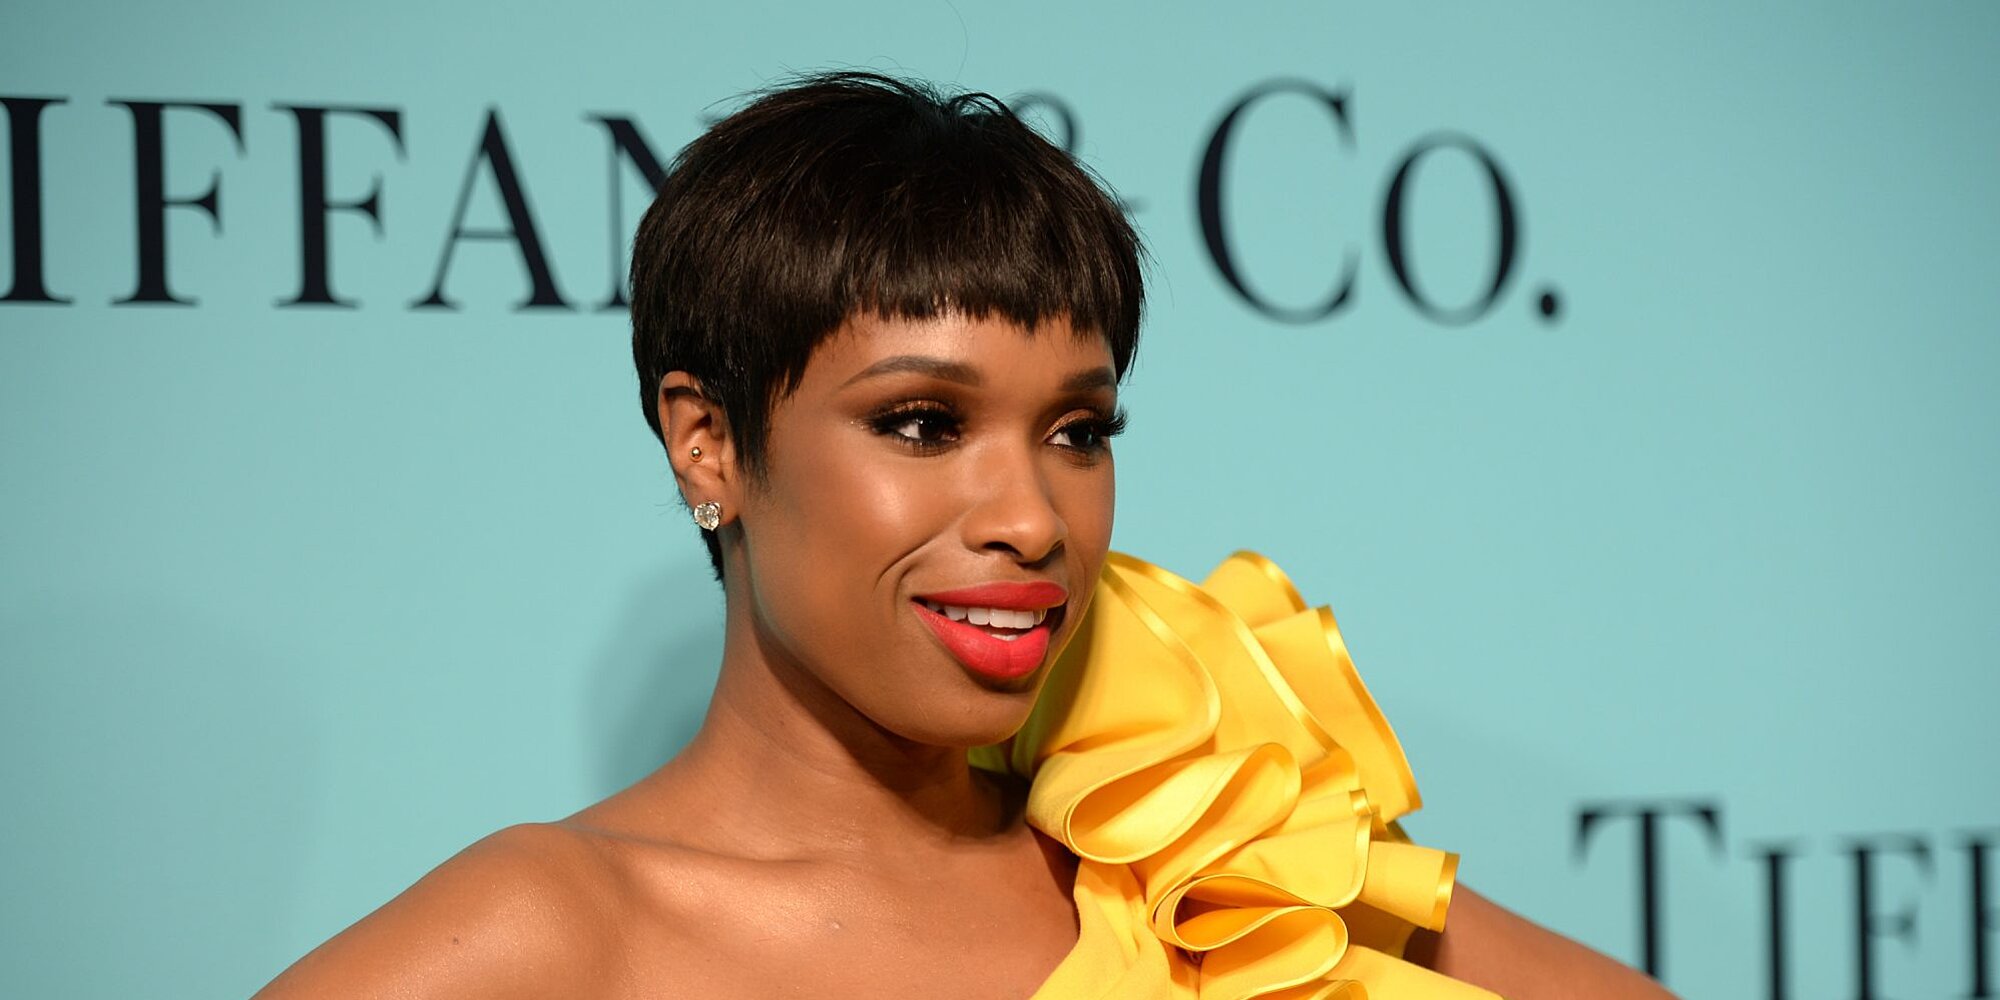 Jennifer Hudson has the best reason for not marrying her fiancé yet